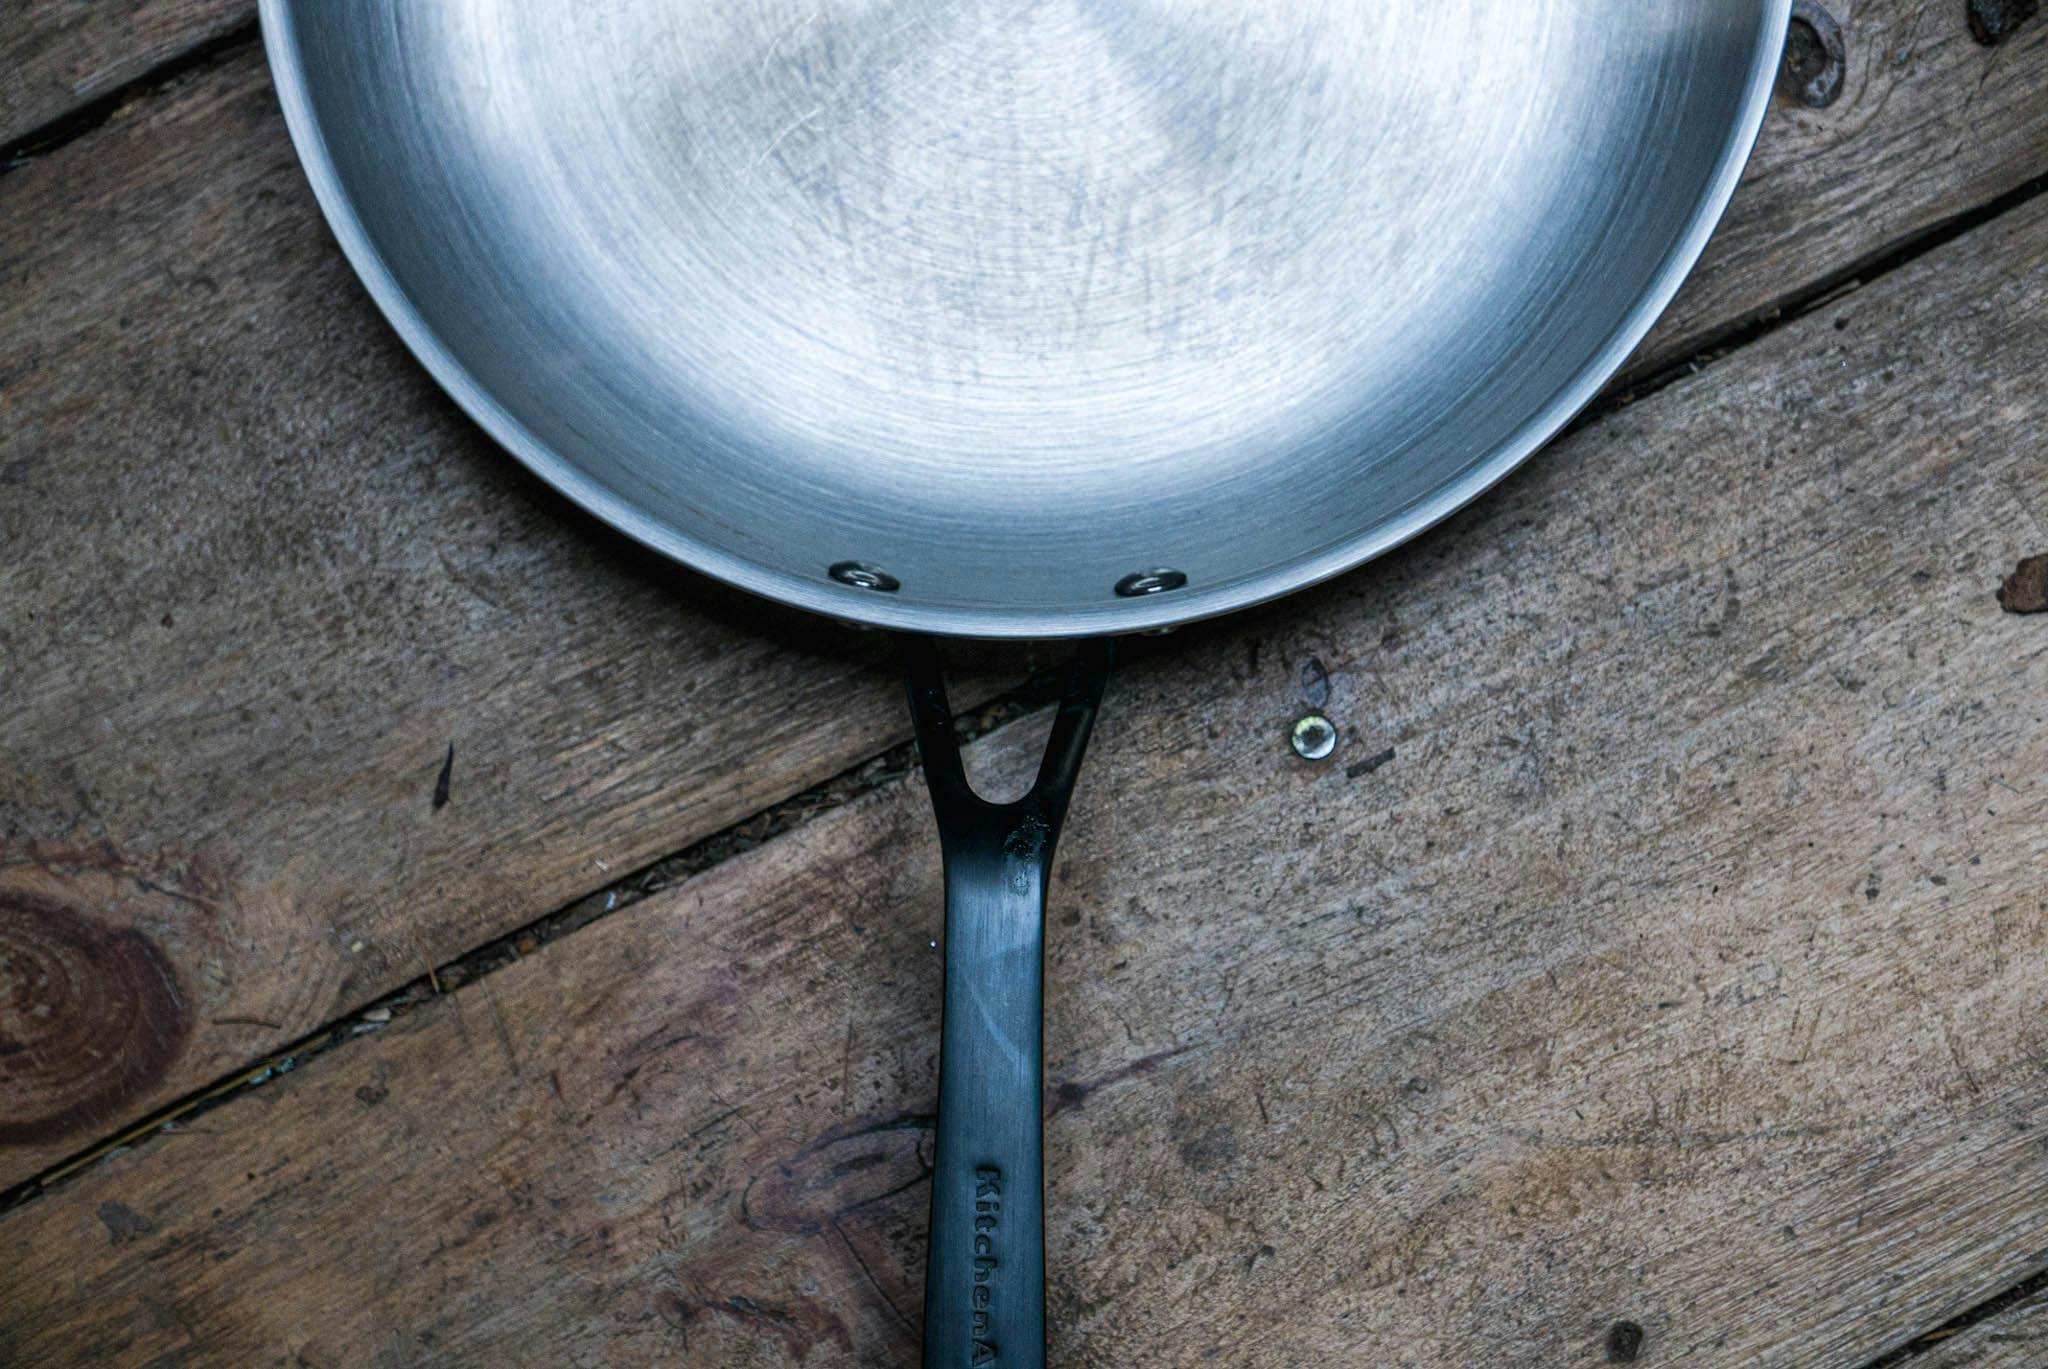 The KitchenAid 5-Ply Clad Stainless Steel Induction Frying Pan, 12.25-Inch, Polished Stainless Steel. 